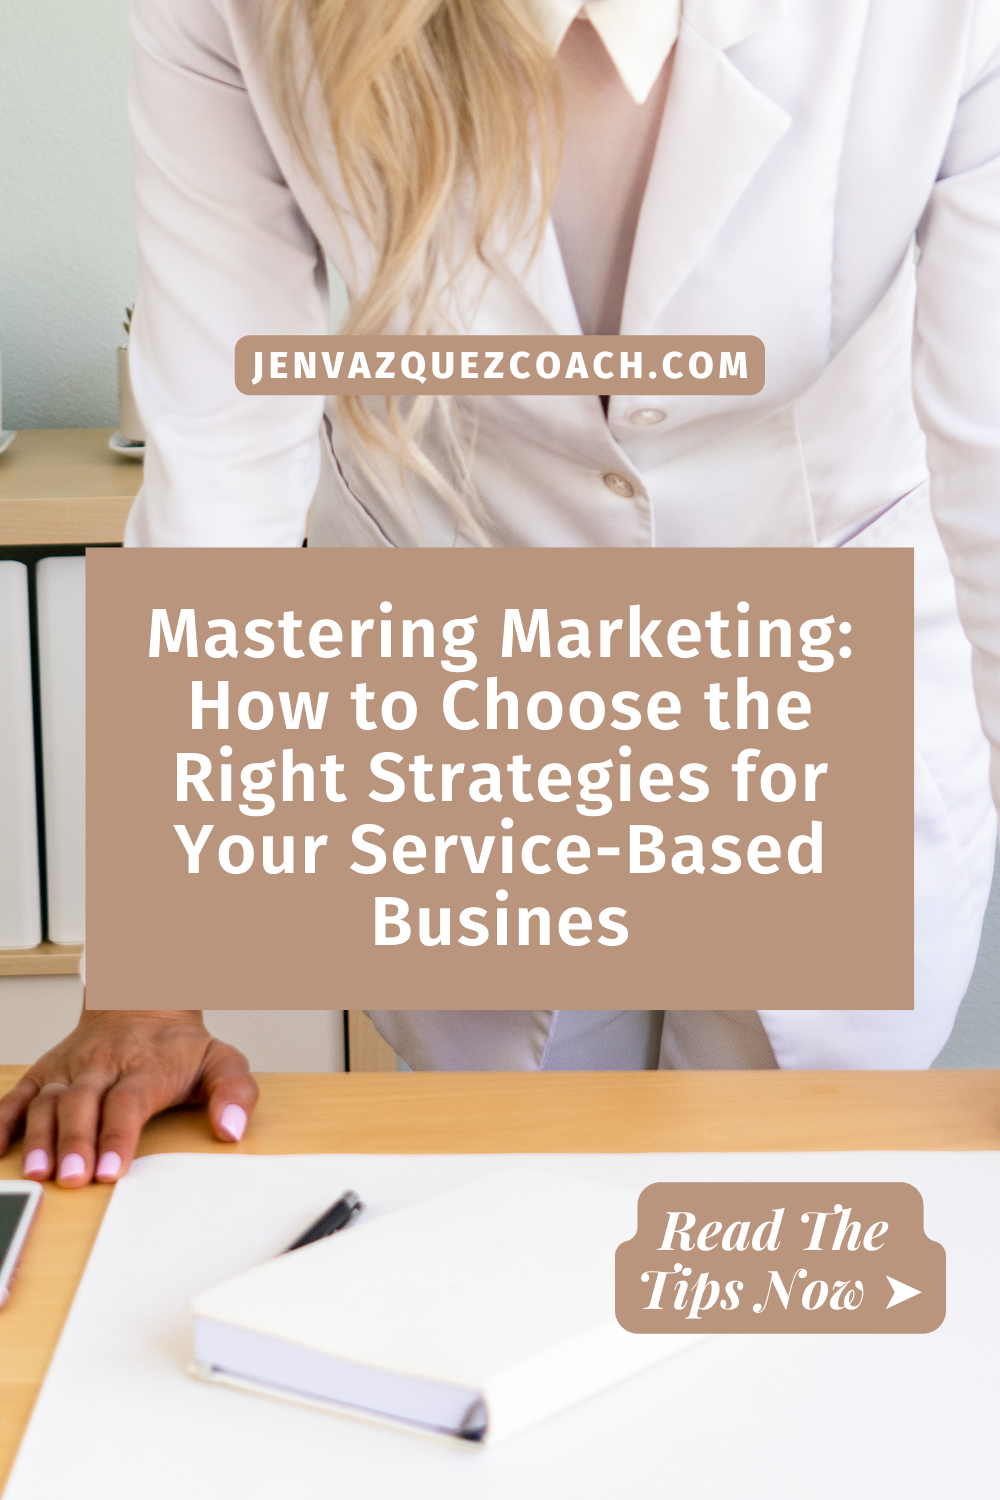 Unleash Your Business's Potential: Marketing Strategies Every Female Service Business Owner Needs to Know